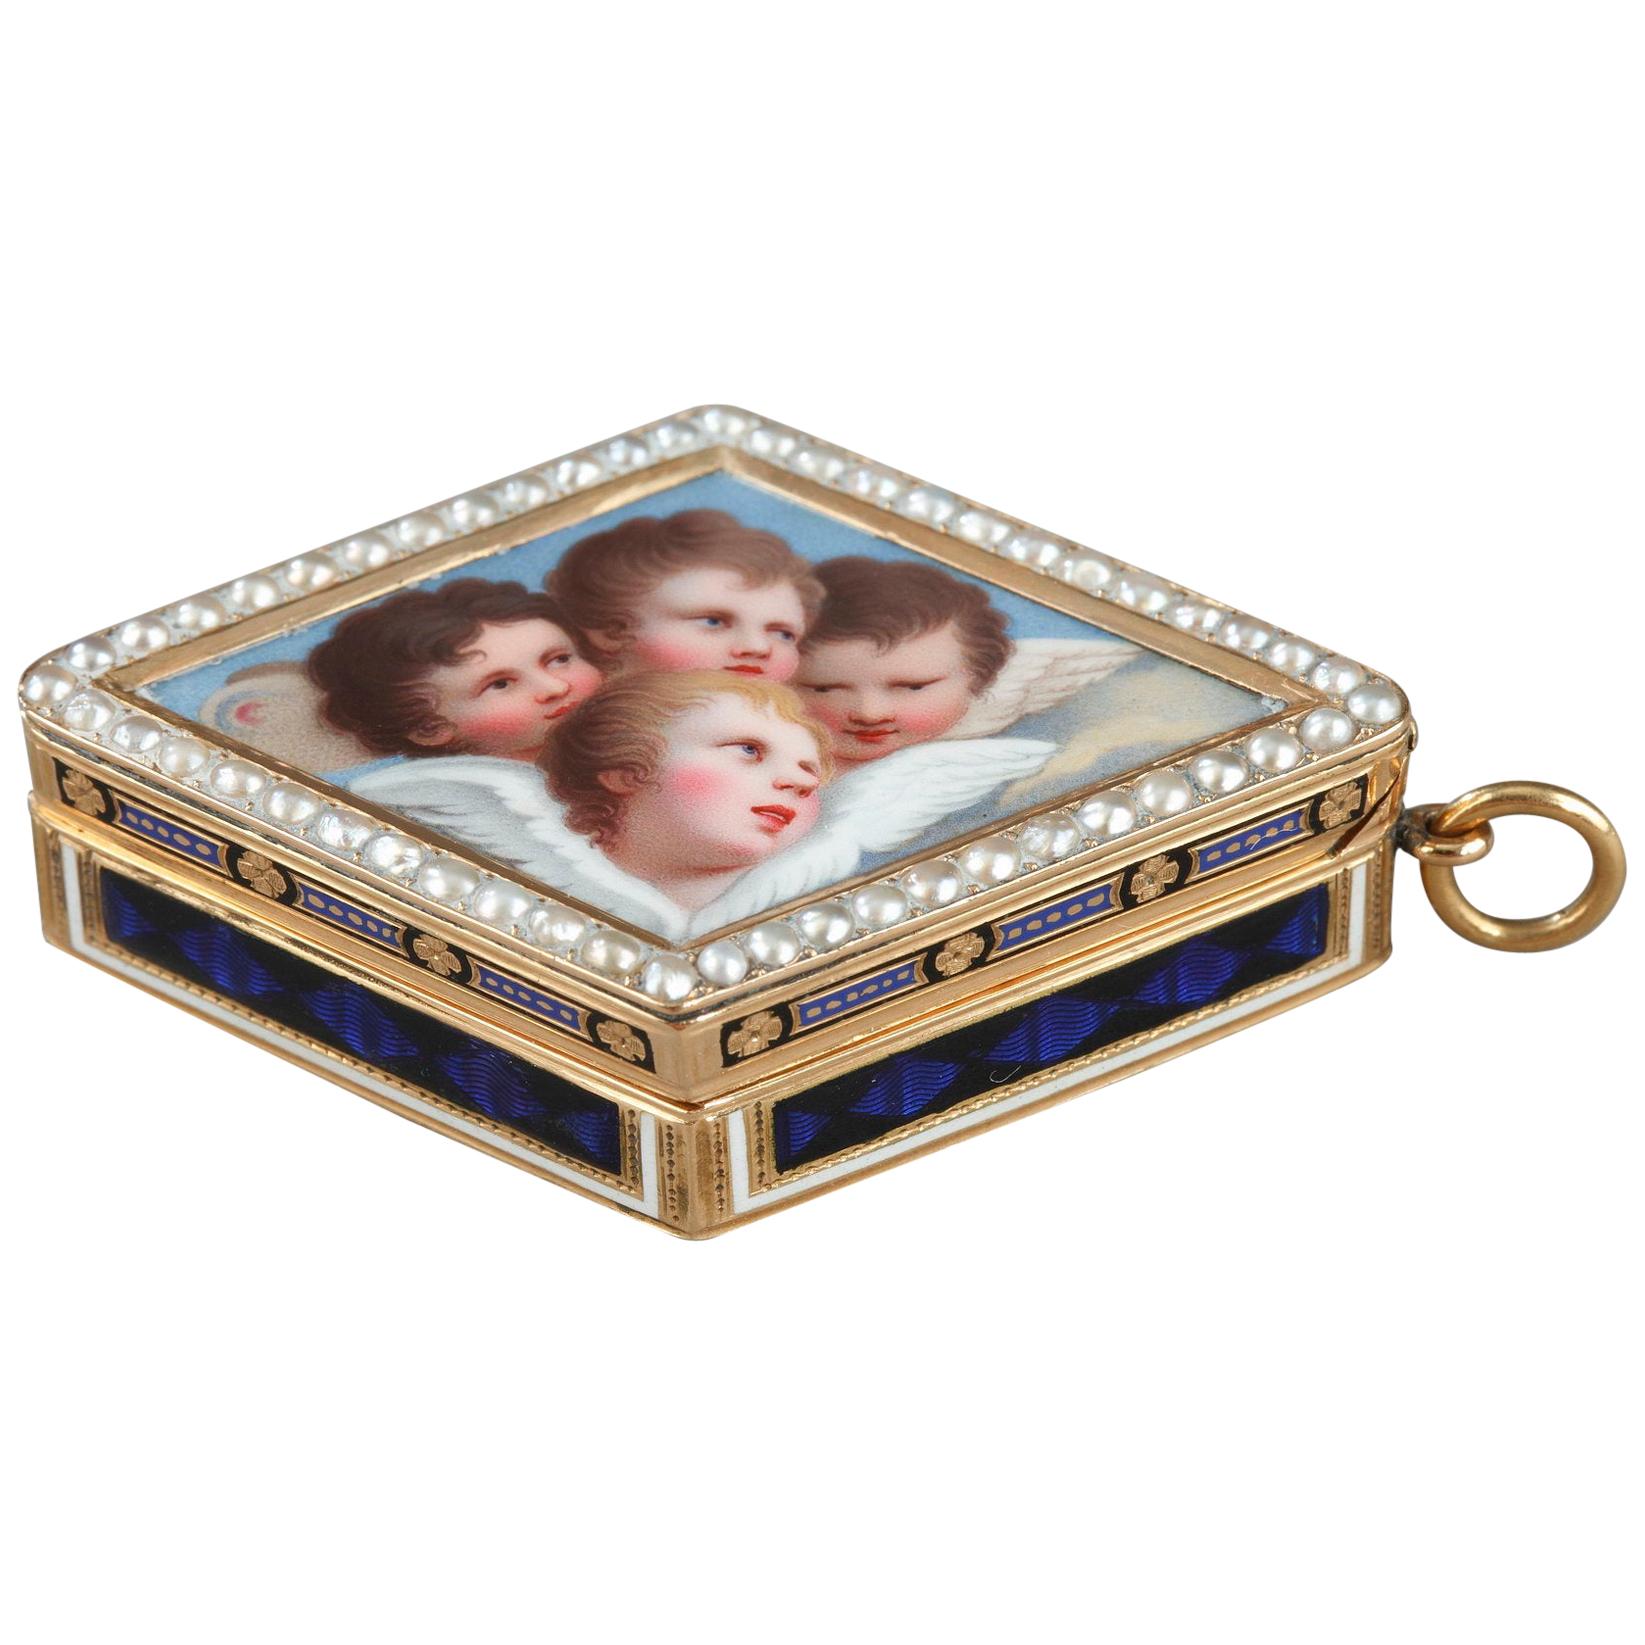 Gold Vinaigrette with Pearls and Enamel, Late 18th Century Swiss Work For Sale